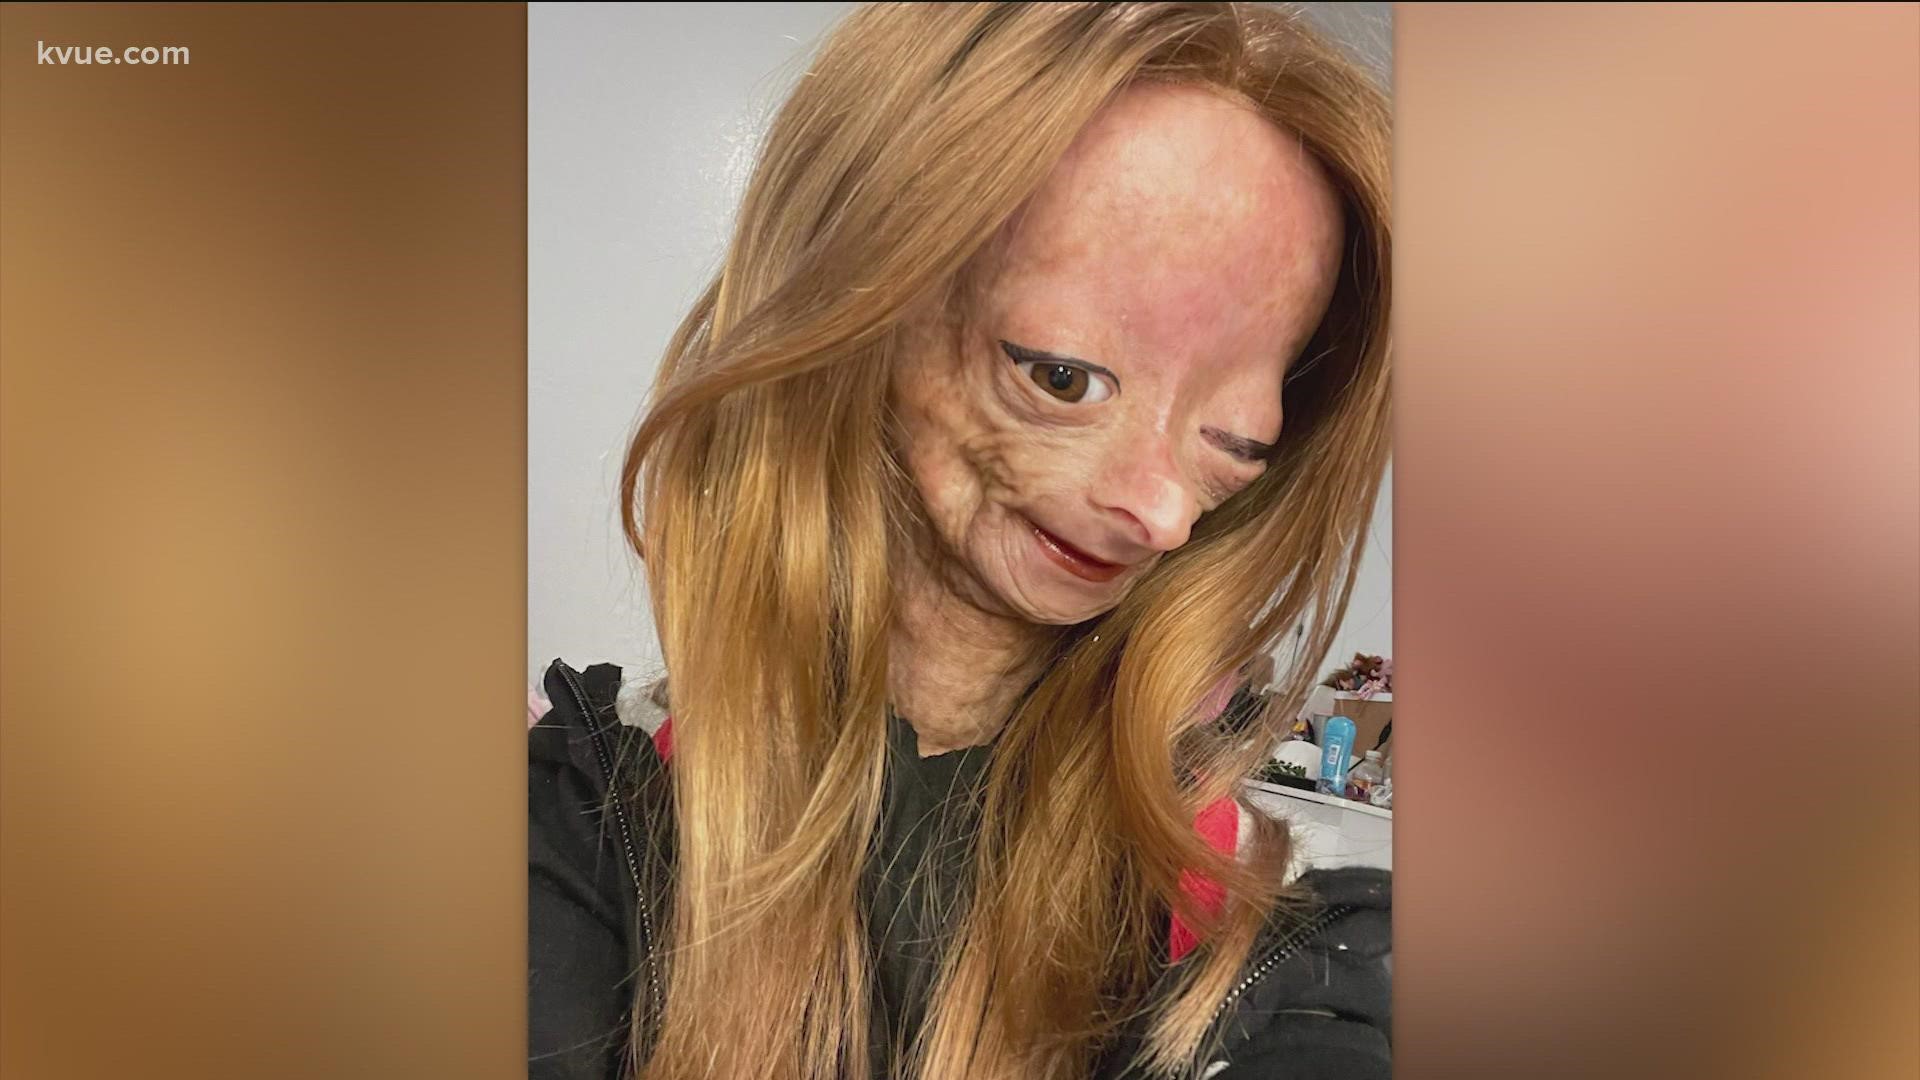 The social media star died at age 15 on Jan. 12. She had a rare genetic condition called Hutchinson-Gilford progeria syndrome, which causes premature aging.